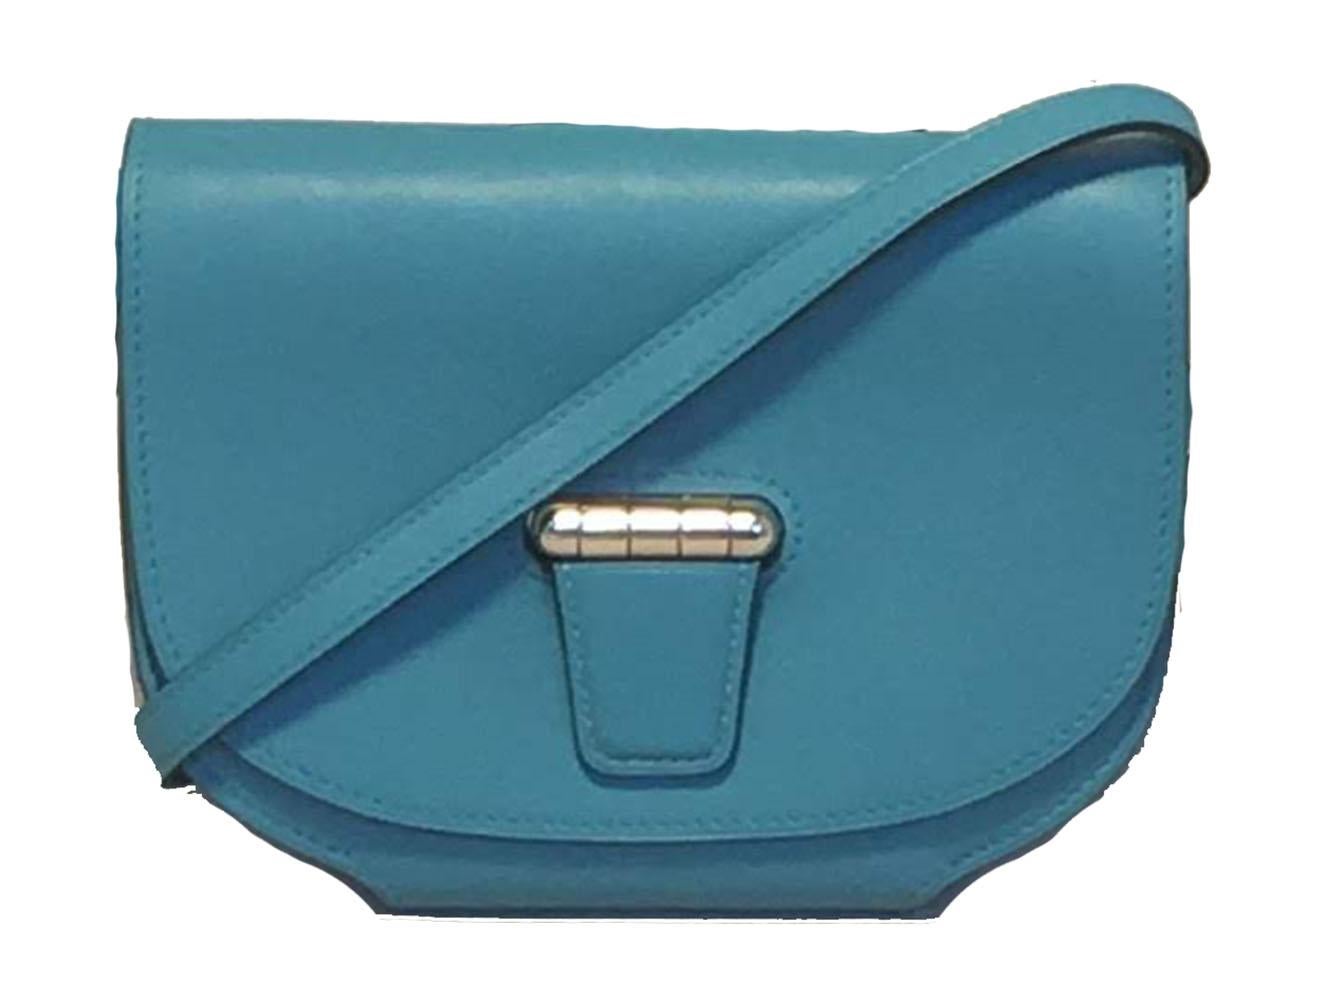 GORGEOUS NWOT Hermes Teal Swift Leather Convoyeur Mini Messenger Crossbody Shoulder Bag in excellent like-new condition.  Teal swift leather trimmed with silver palladium hardware. Unique hinged flap closure opens to matching teal leather interior